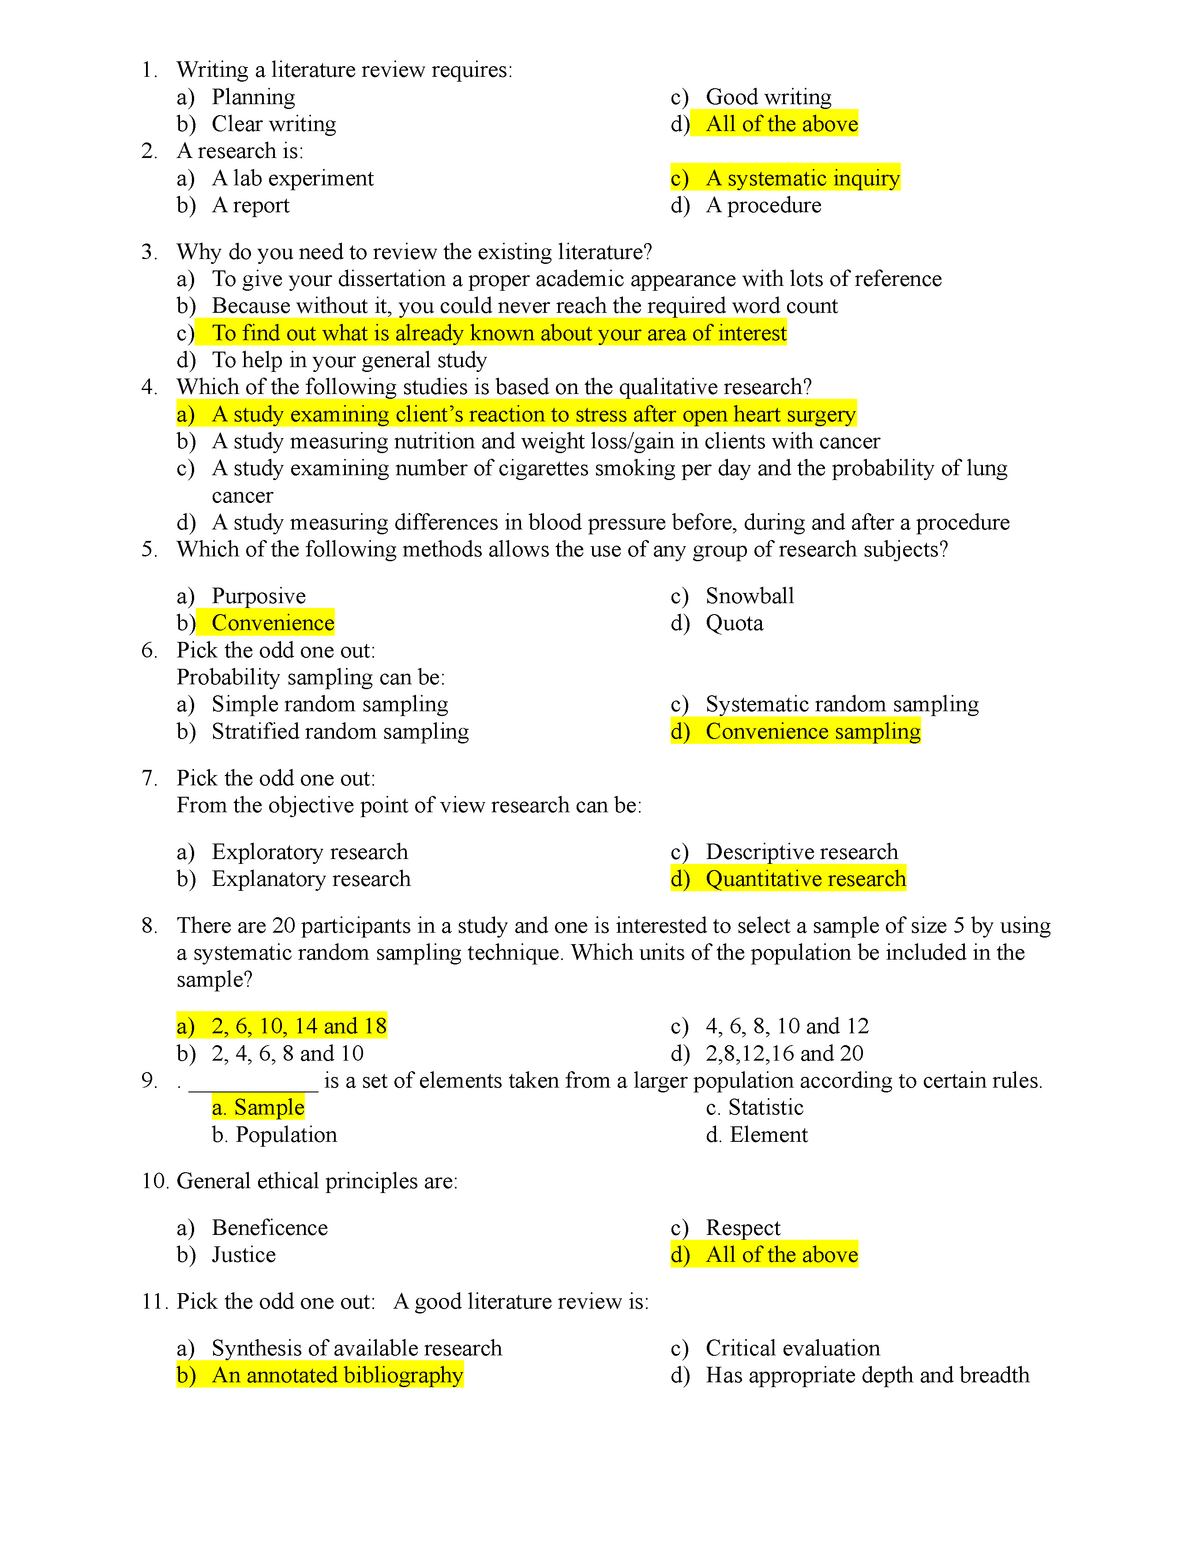 research questions and answers mcq